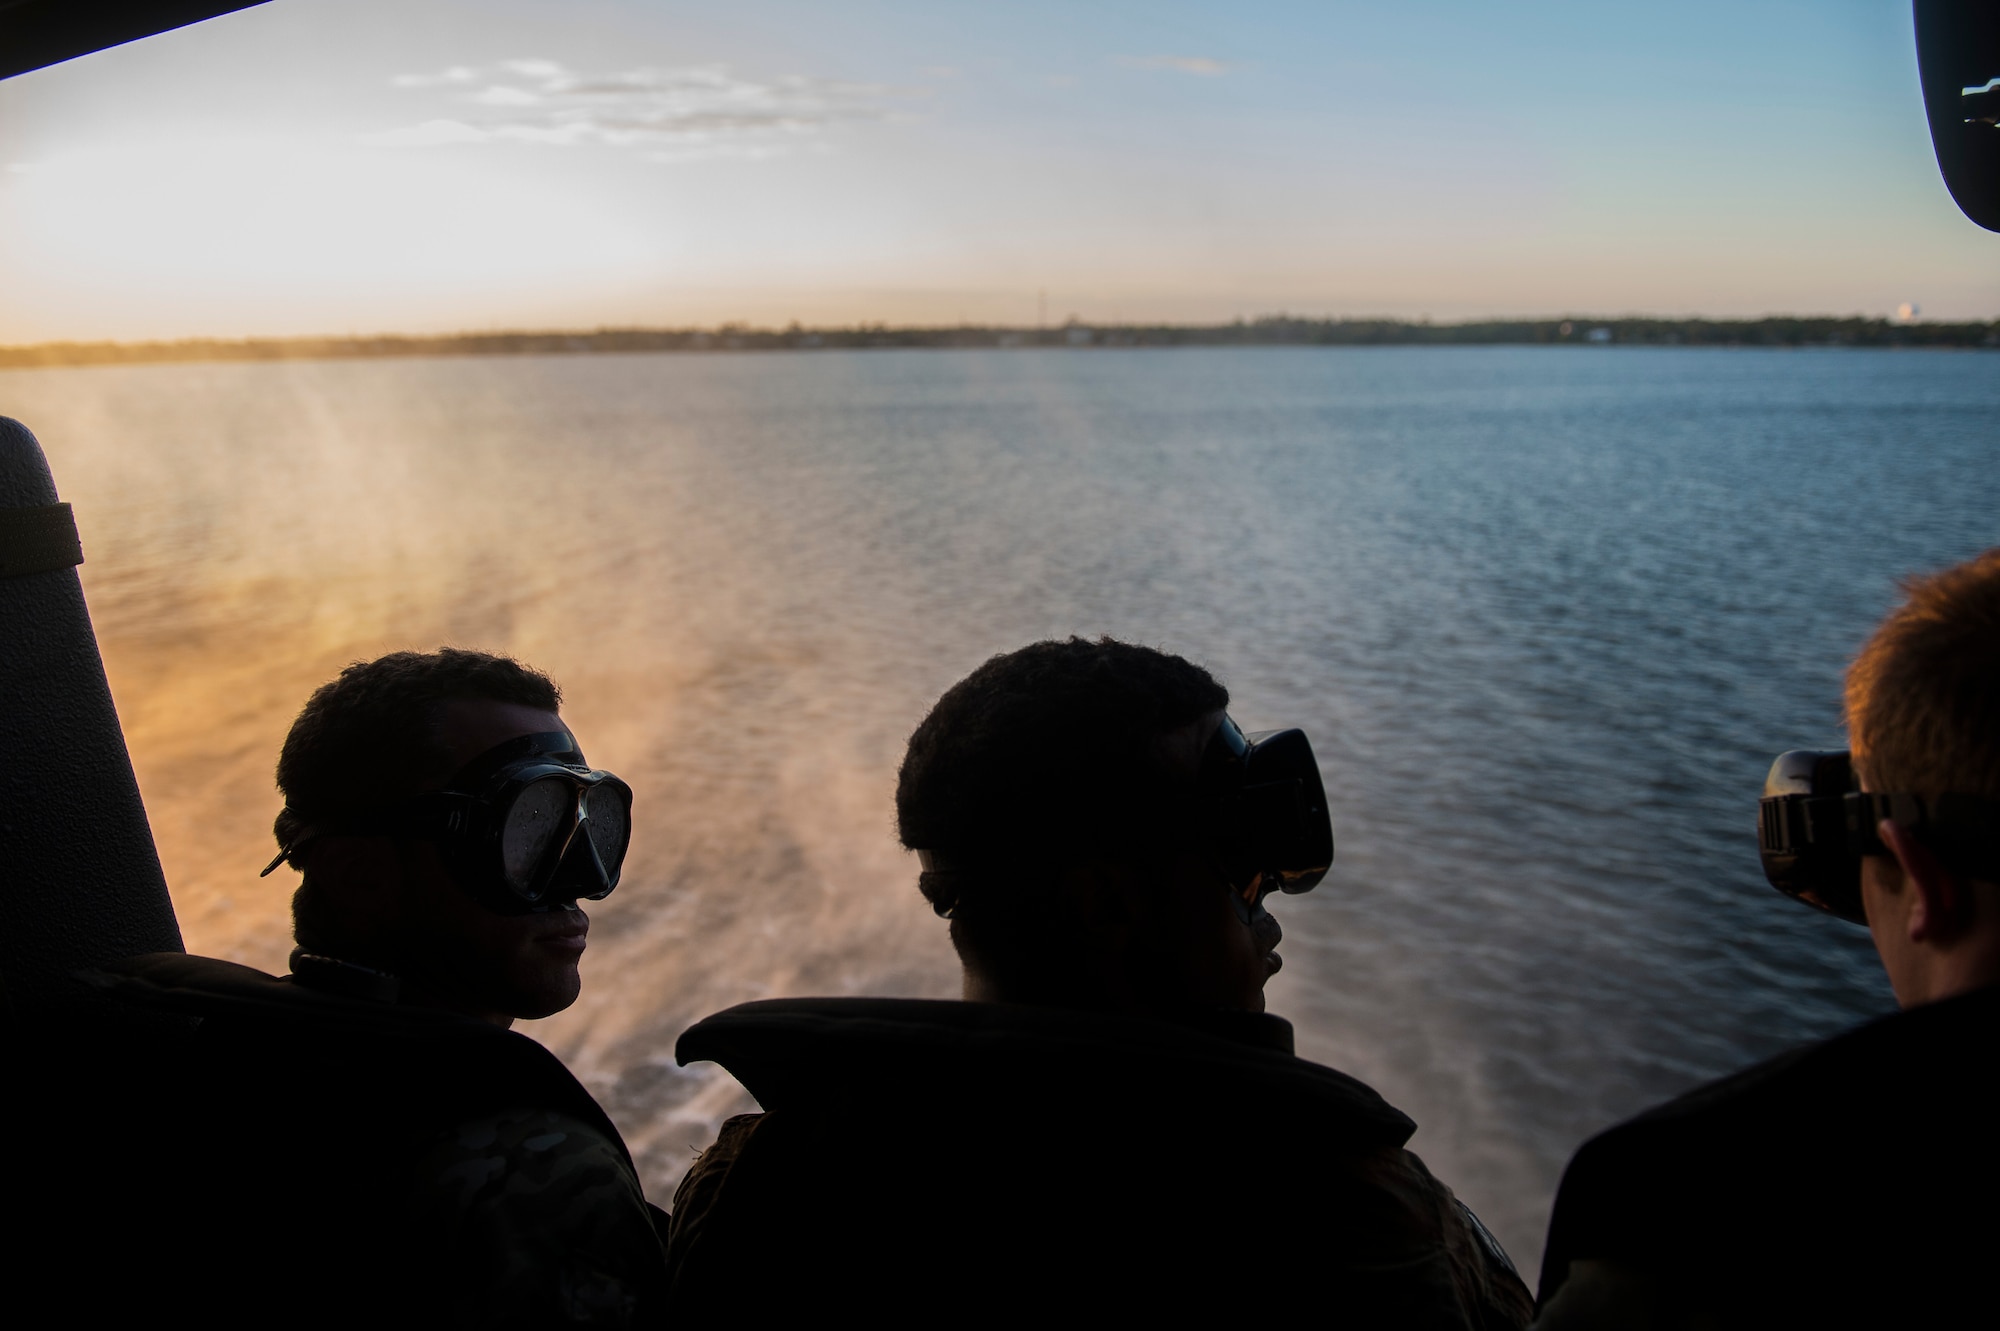 Members of the U.S. Army 7th Special Forces Group wait to jump out of a UH-60 Black Hawk during helocast training April 21, 2015, as part of Emerald Warrior at Hurlburt Field, Fla. Emerald Warrior is the Department of Defense's only irregular warfare exercise, allowing joint and combined partners to train together and prepare for real-world contingency operations. (U.S. Air Force photo by Staff Sgt. Kenneth W. Norman/Released)